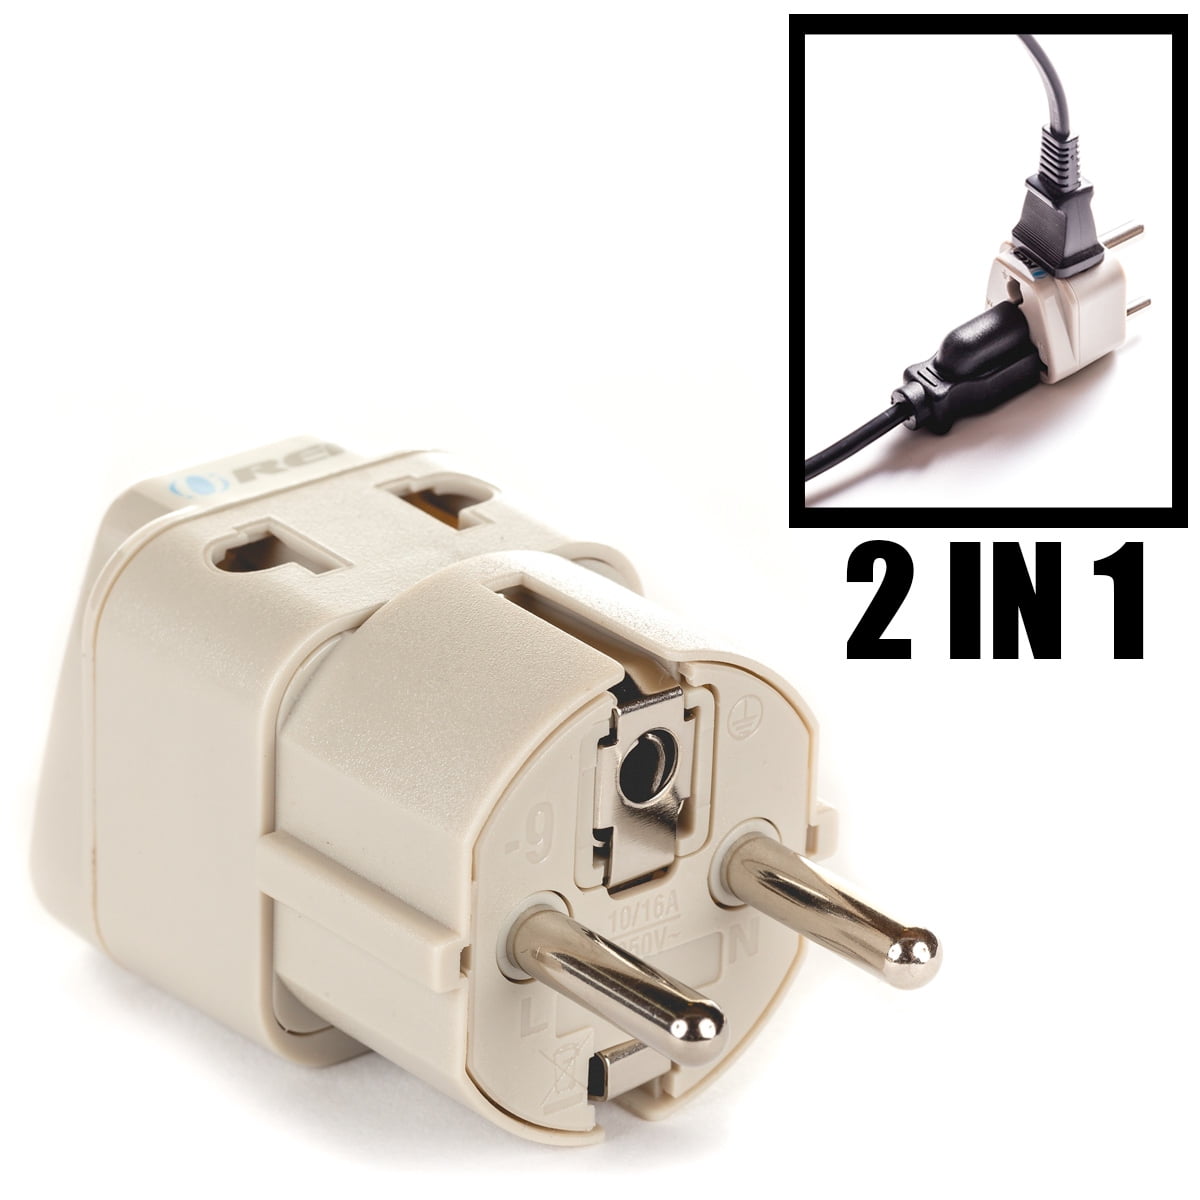 UAE OREI Grounded 2 in 1 Plug Adapter - Europe Type E//F Russia 4 Pack